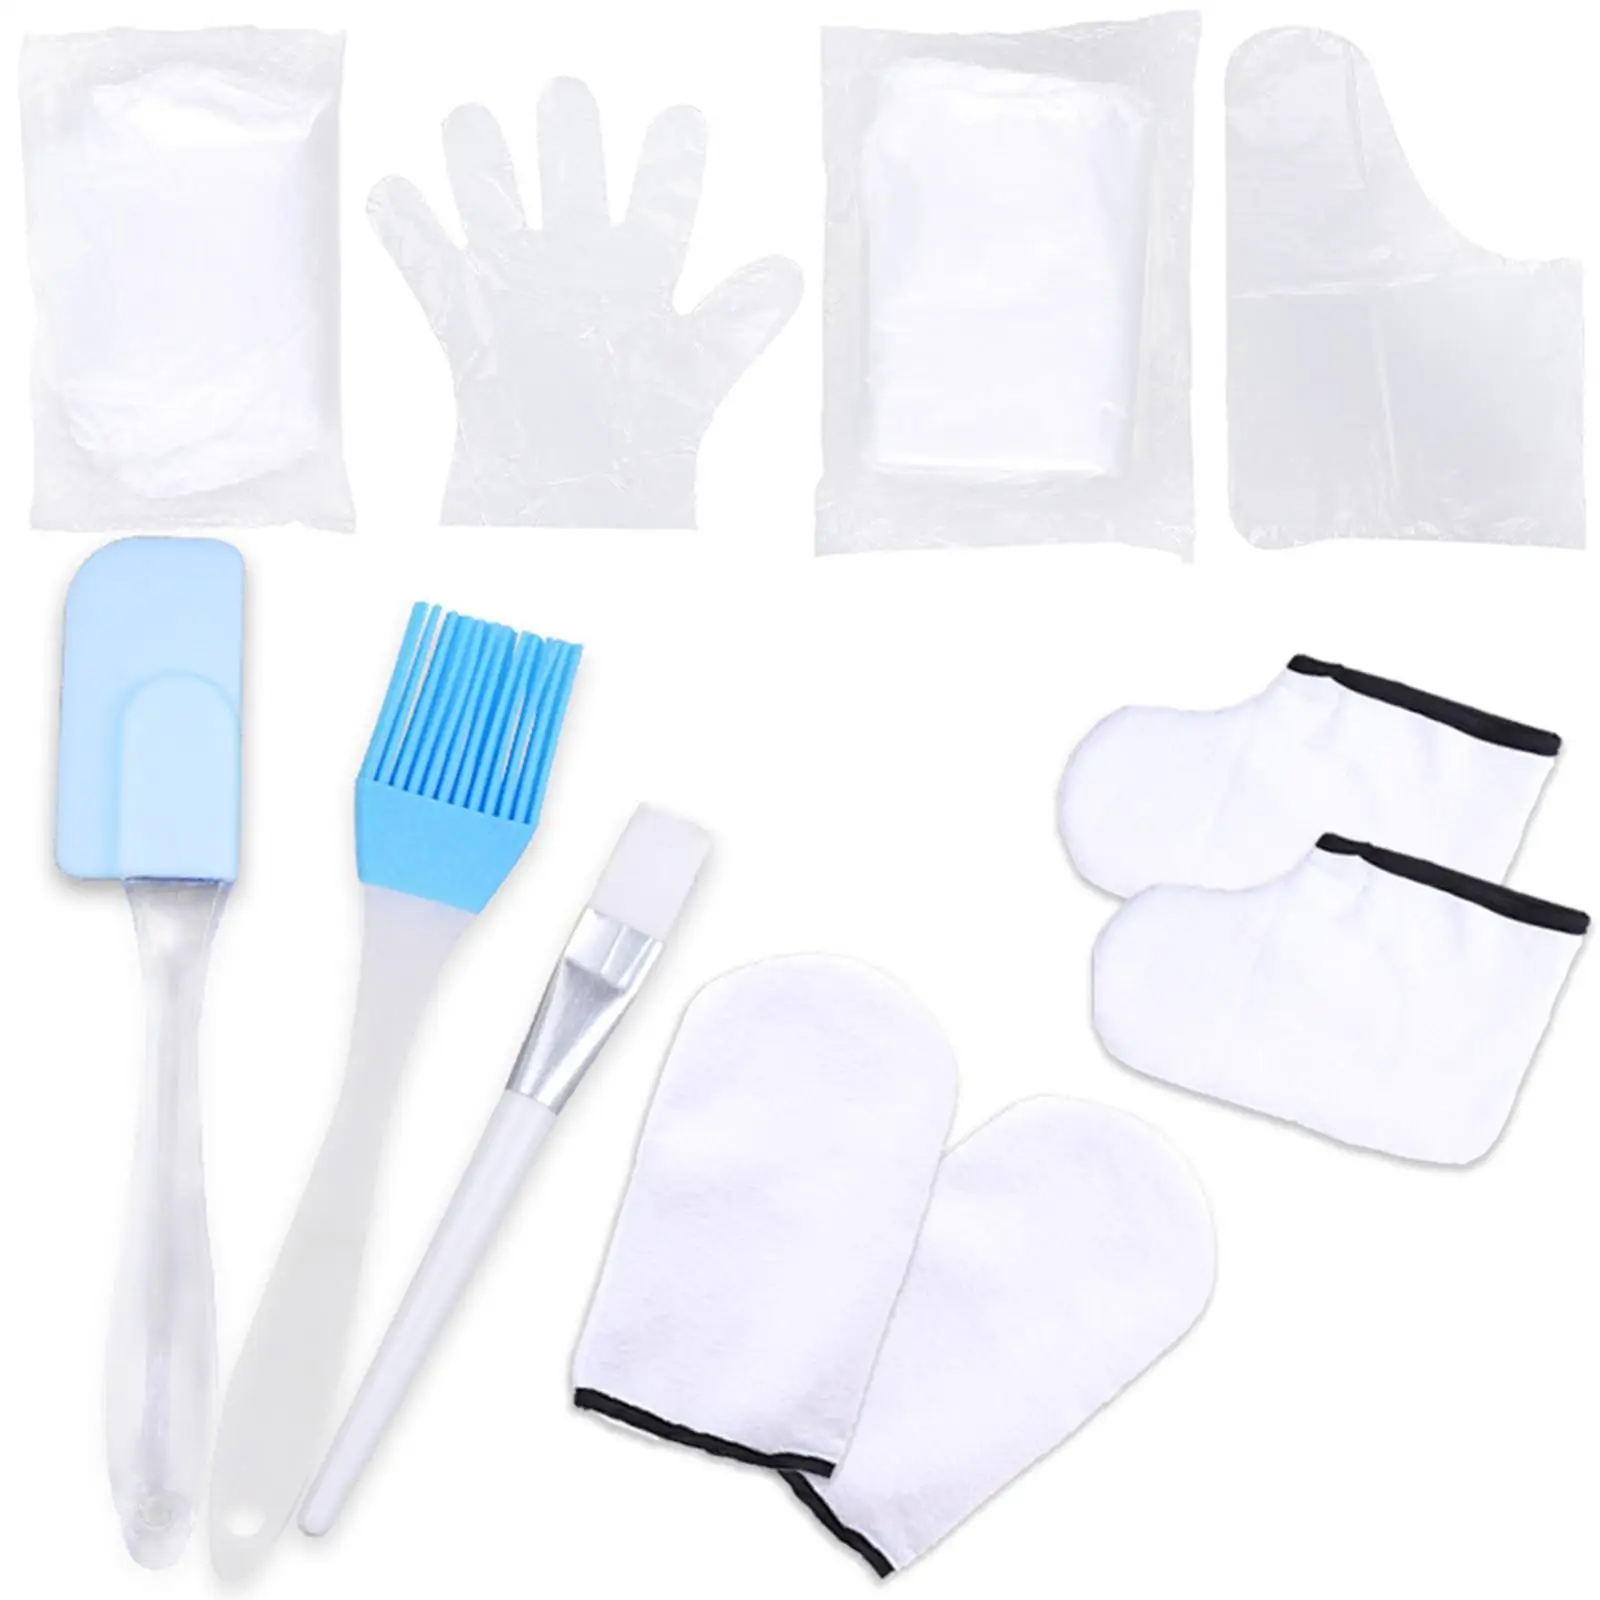 Paraffin Wax Melting Gloves and Booties Wax Heater Protection Kit Wax Hand Foot Gloves for Hand Feet Care SPA Bath Men Women